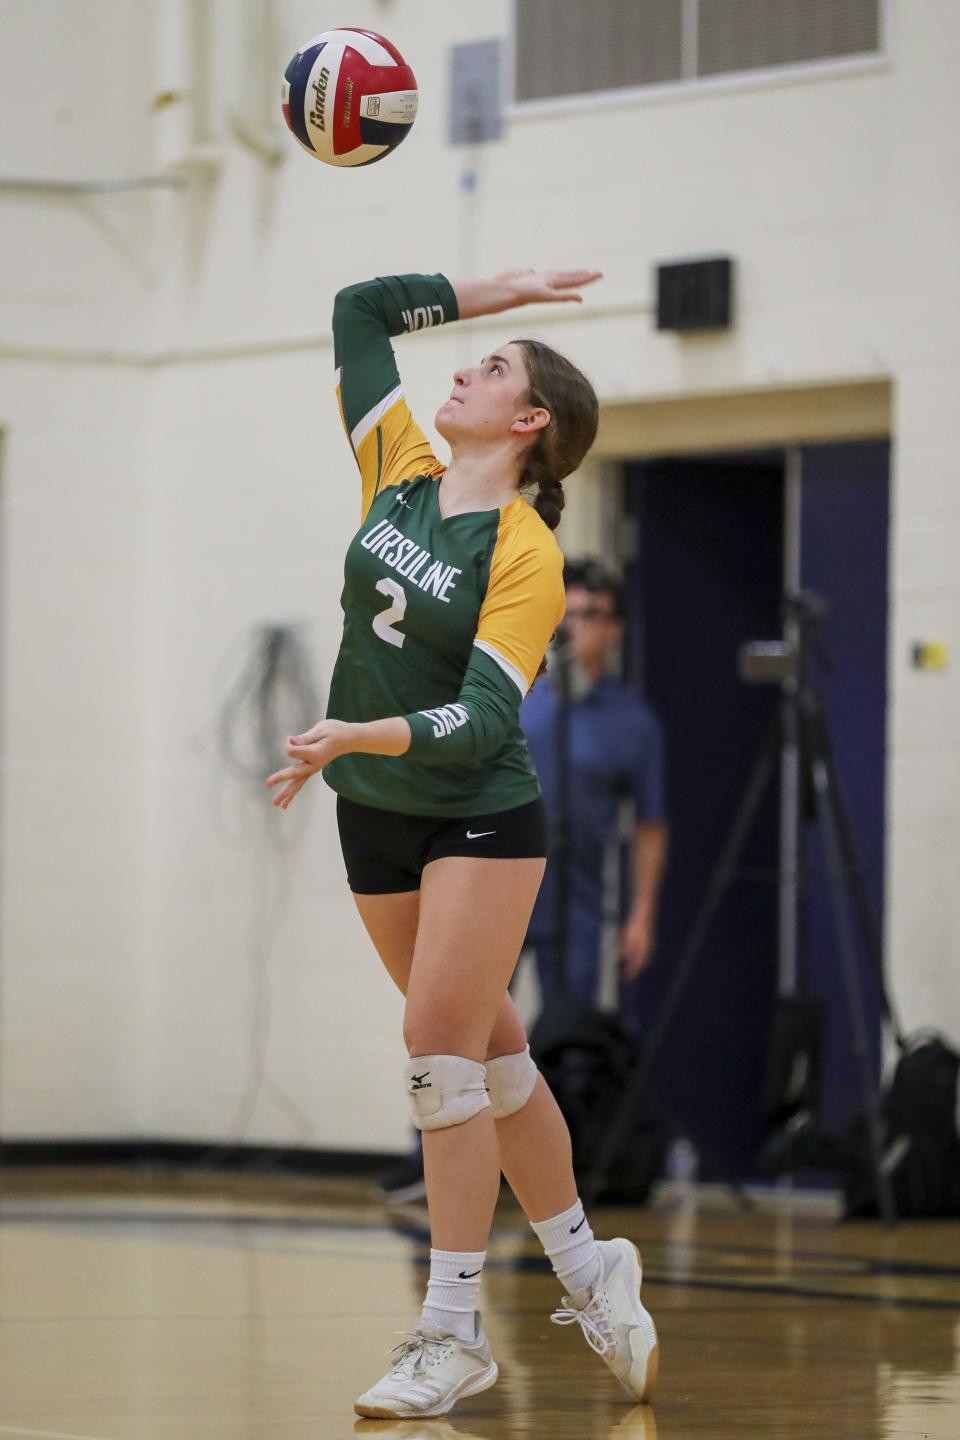 In the 2023 season, Ursuline's Maya Brausch was second in the Girls Greater Catholic League with 467 digs.